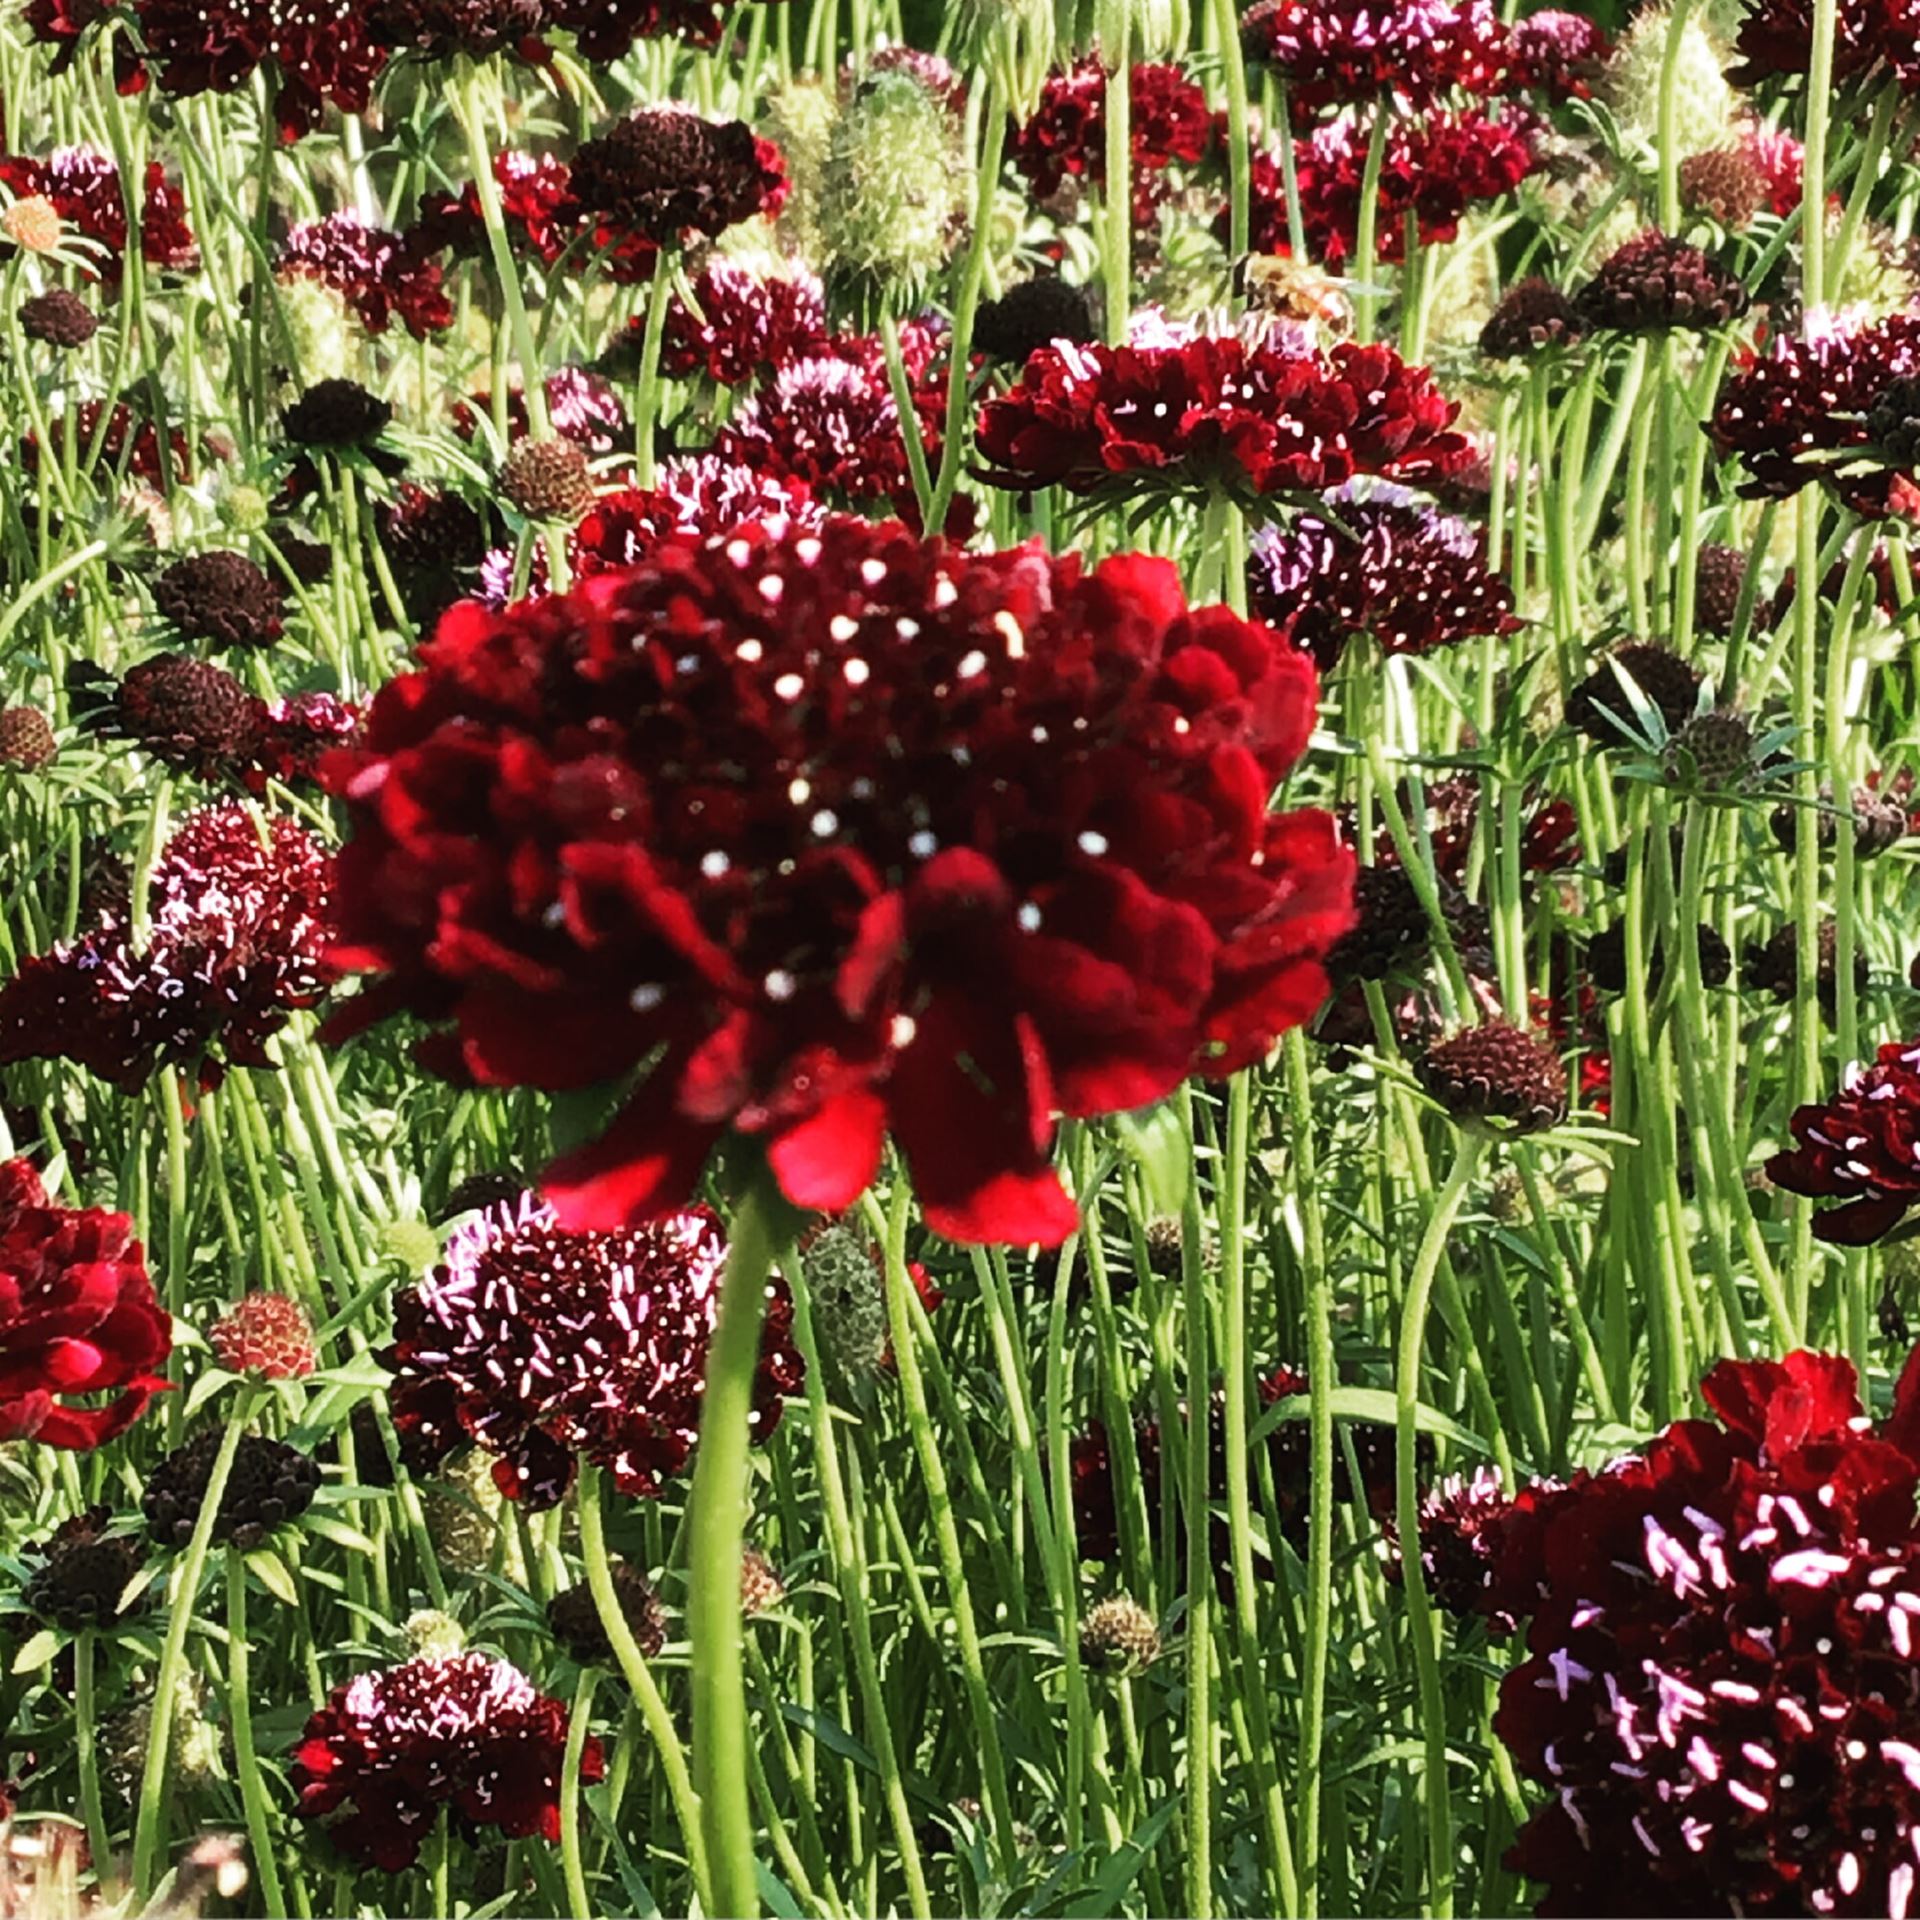 HTS-Scabiosa-Sweet-Paars